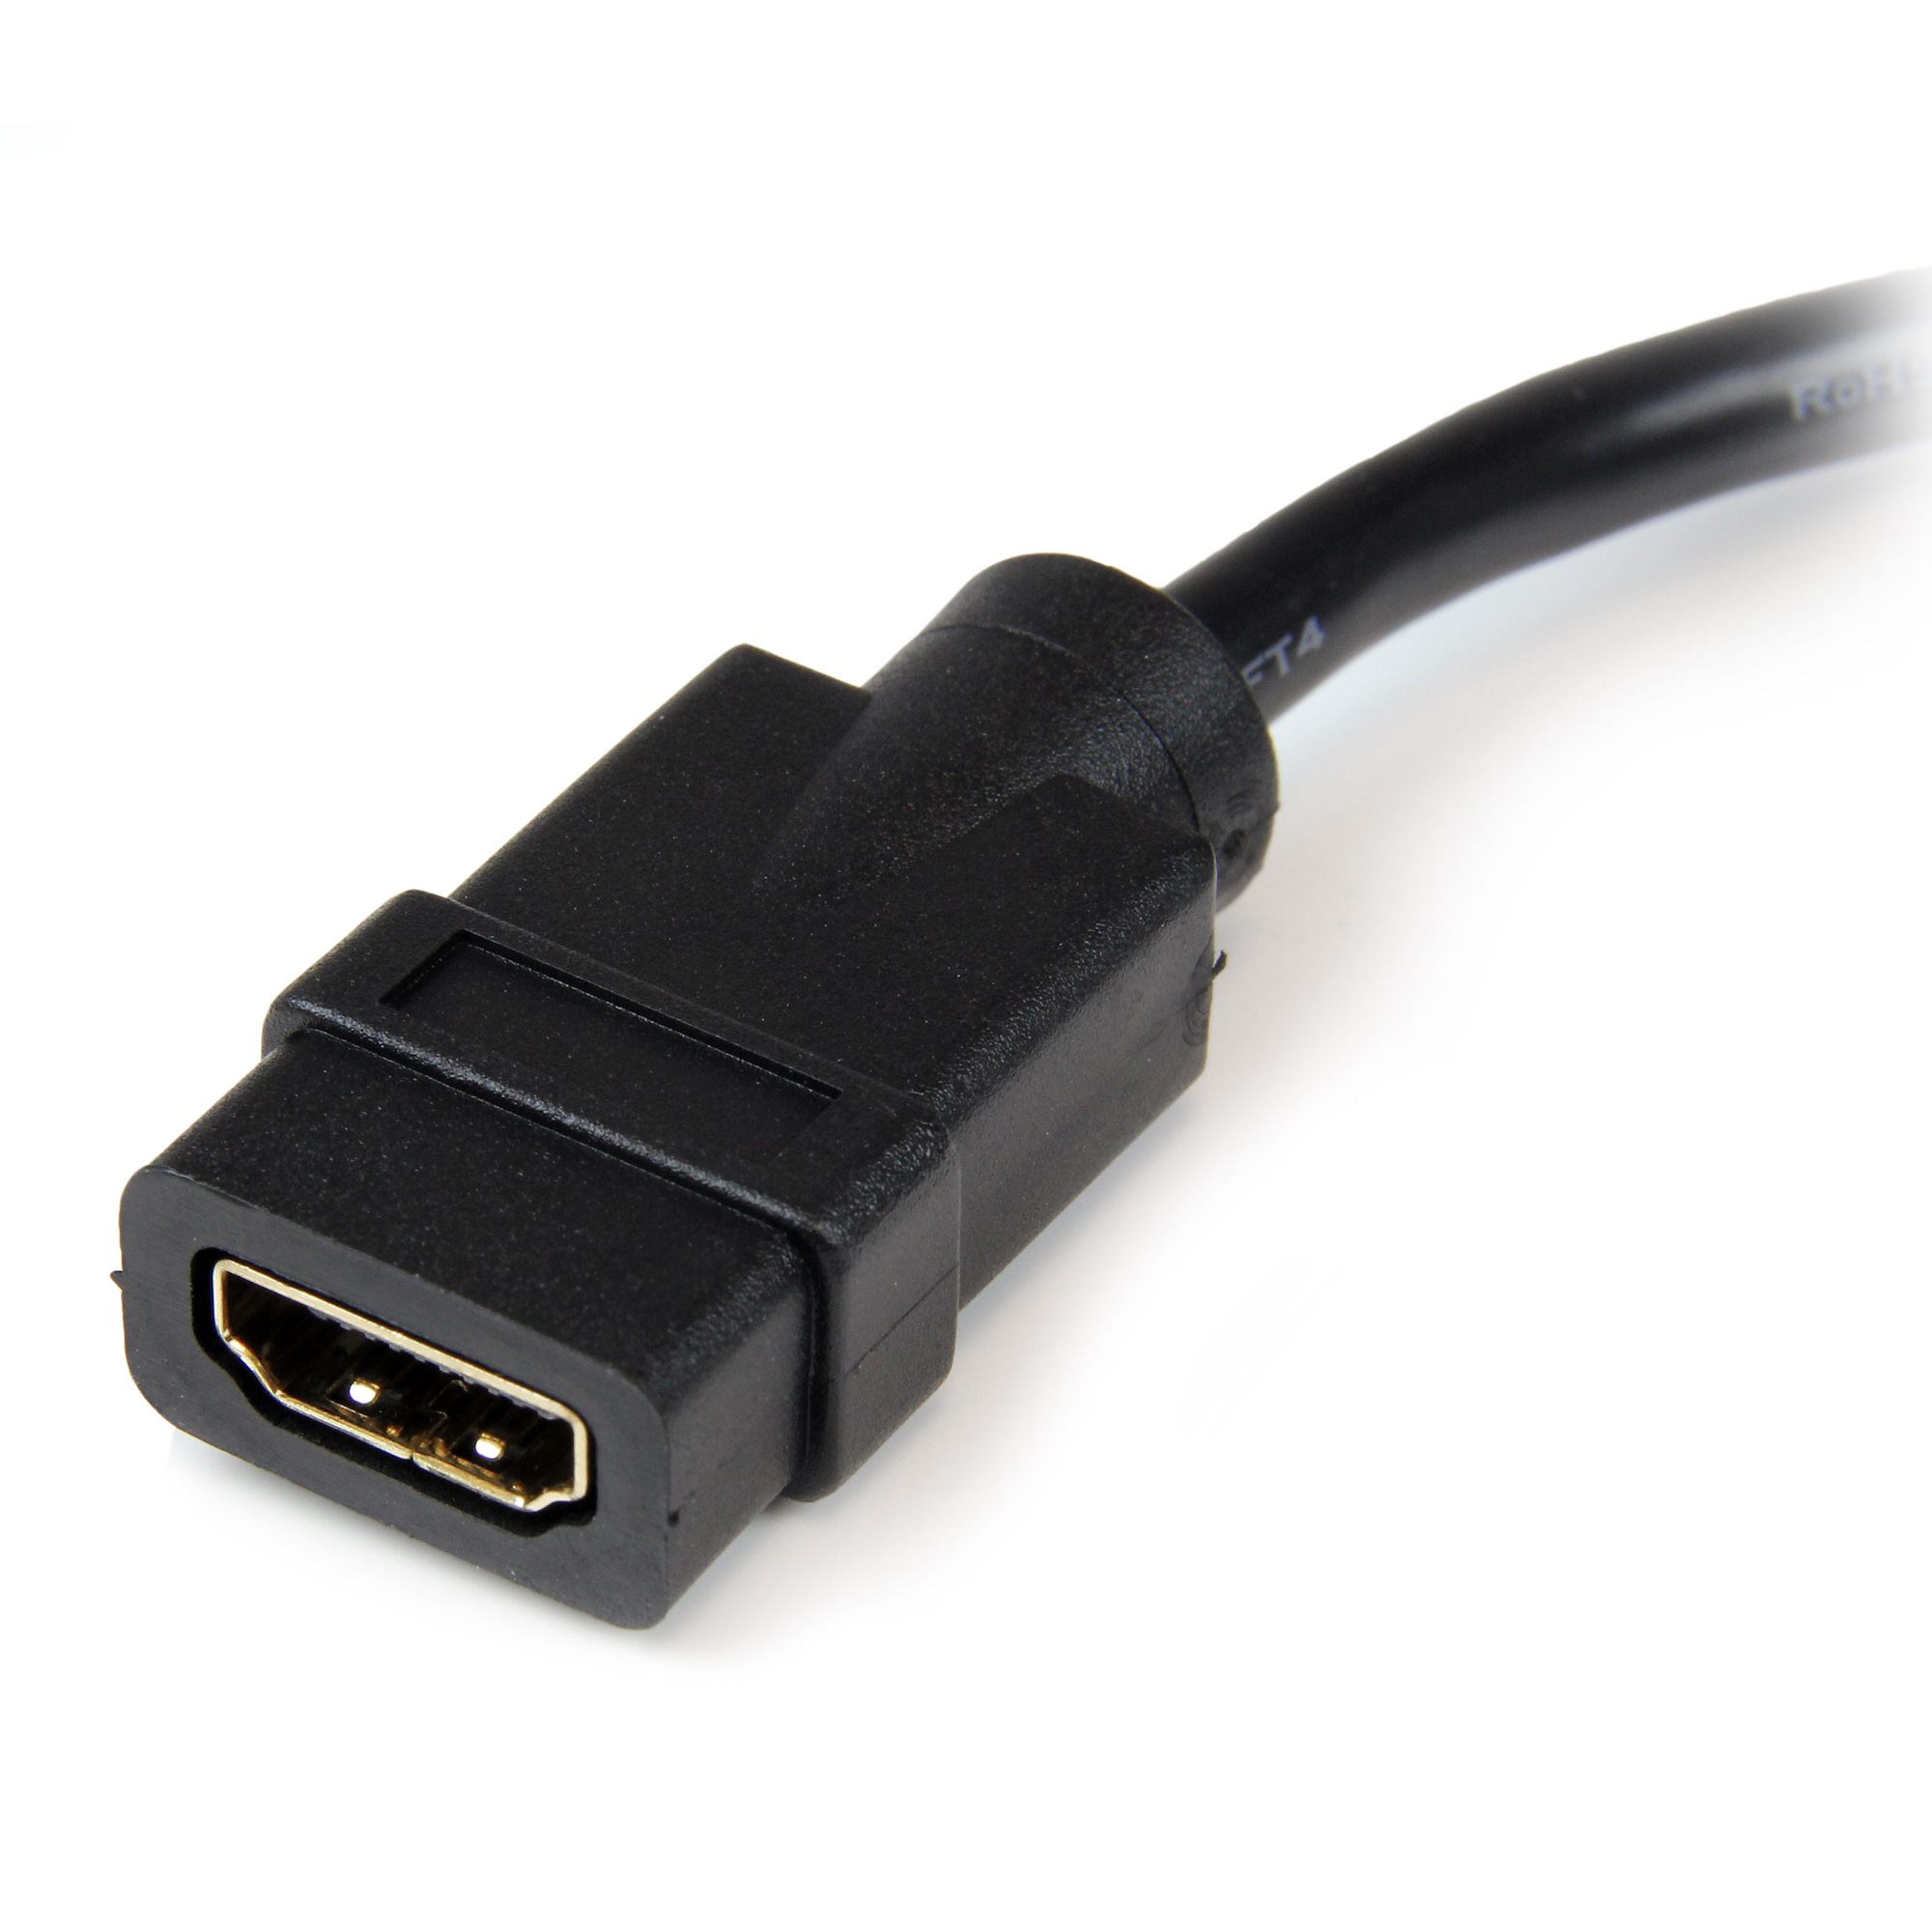 StarTech.com HDMI Male to DVI Female Adapter - 8in - 1080p DVI-D Gender  Changer Cable (HDDVIMF8IN)